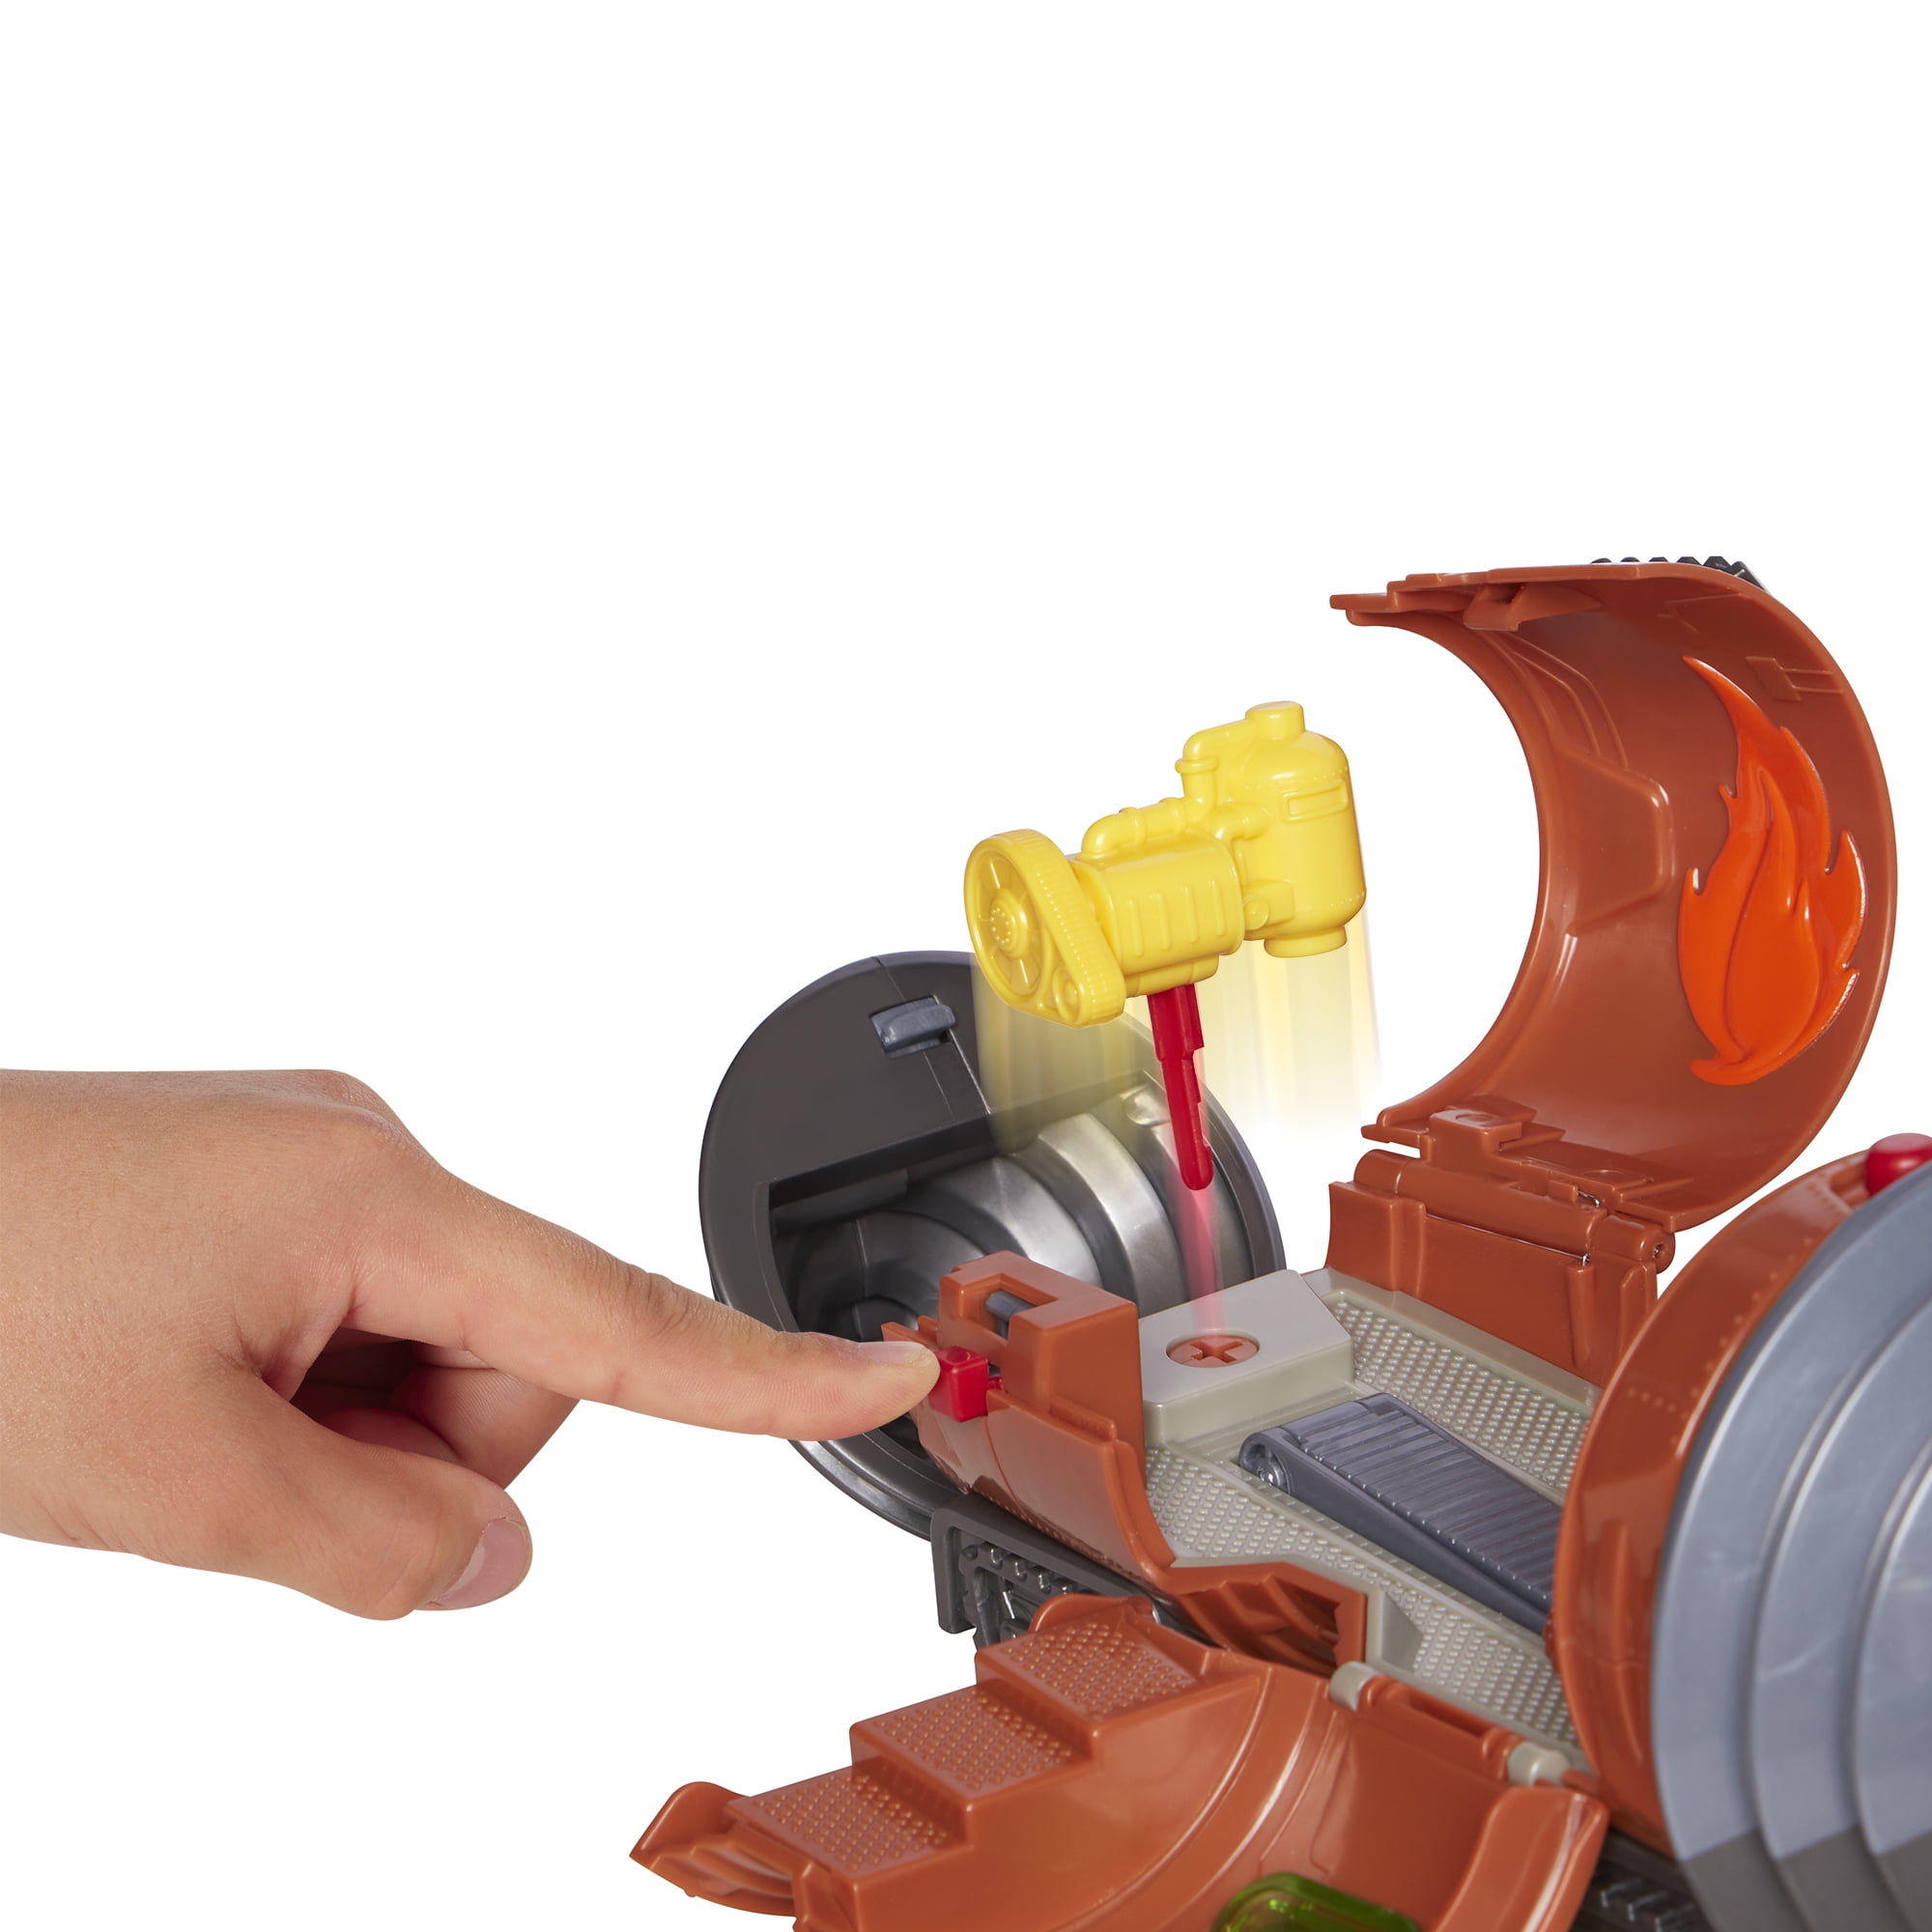 The Incredibles 2 Tunneler Vehicle Play Set with Junior Super Underminer Figure